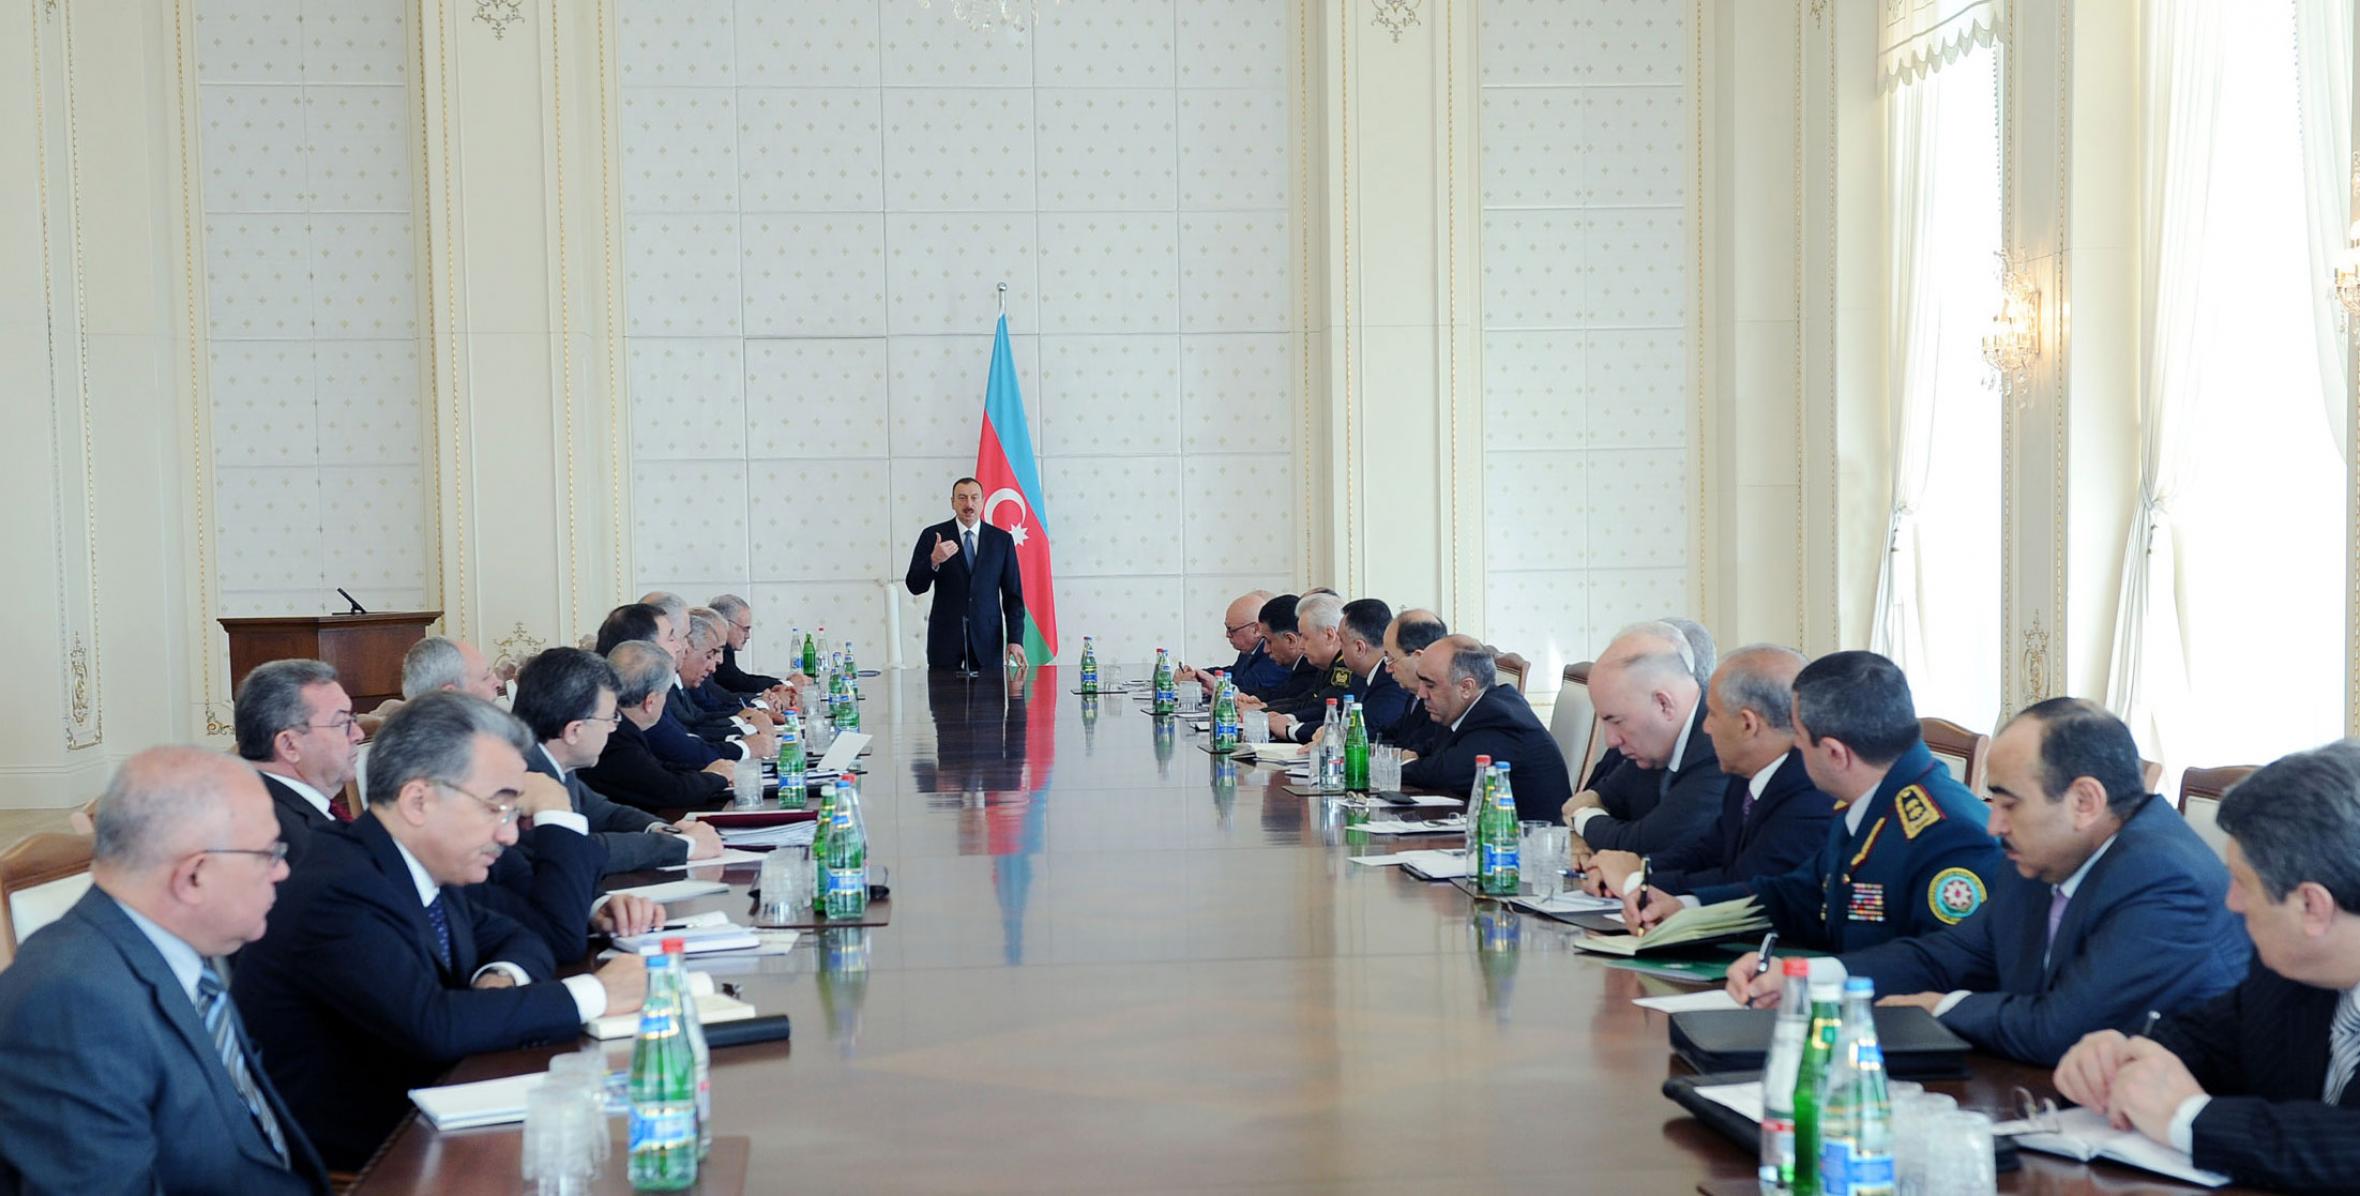 Ilham Aliyev chaired a meeting of the Cabinet of Ministers